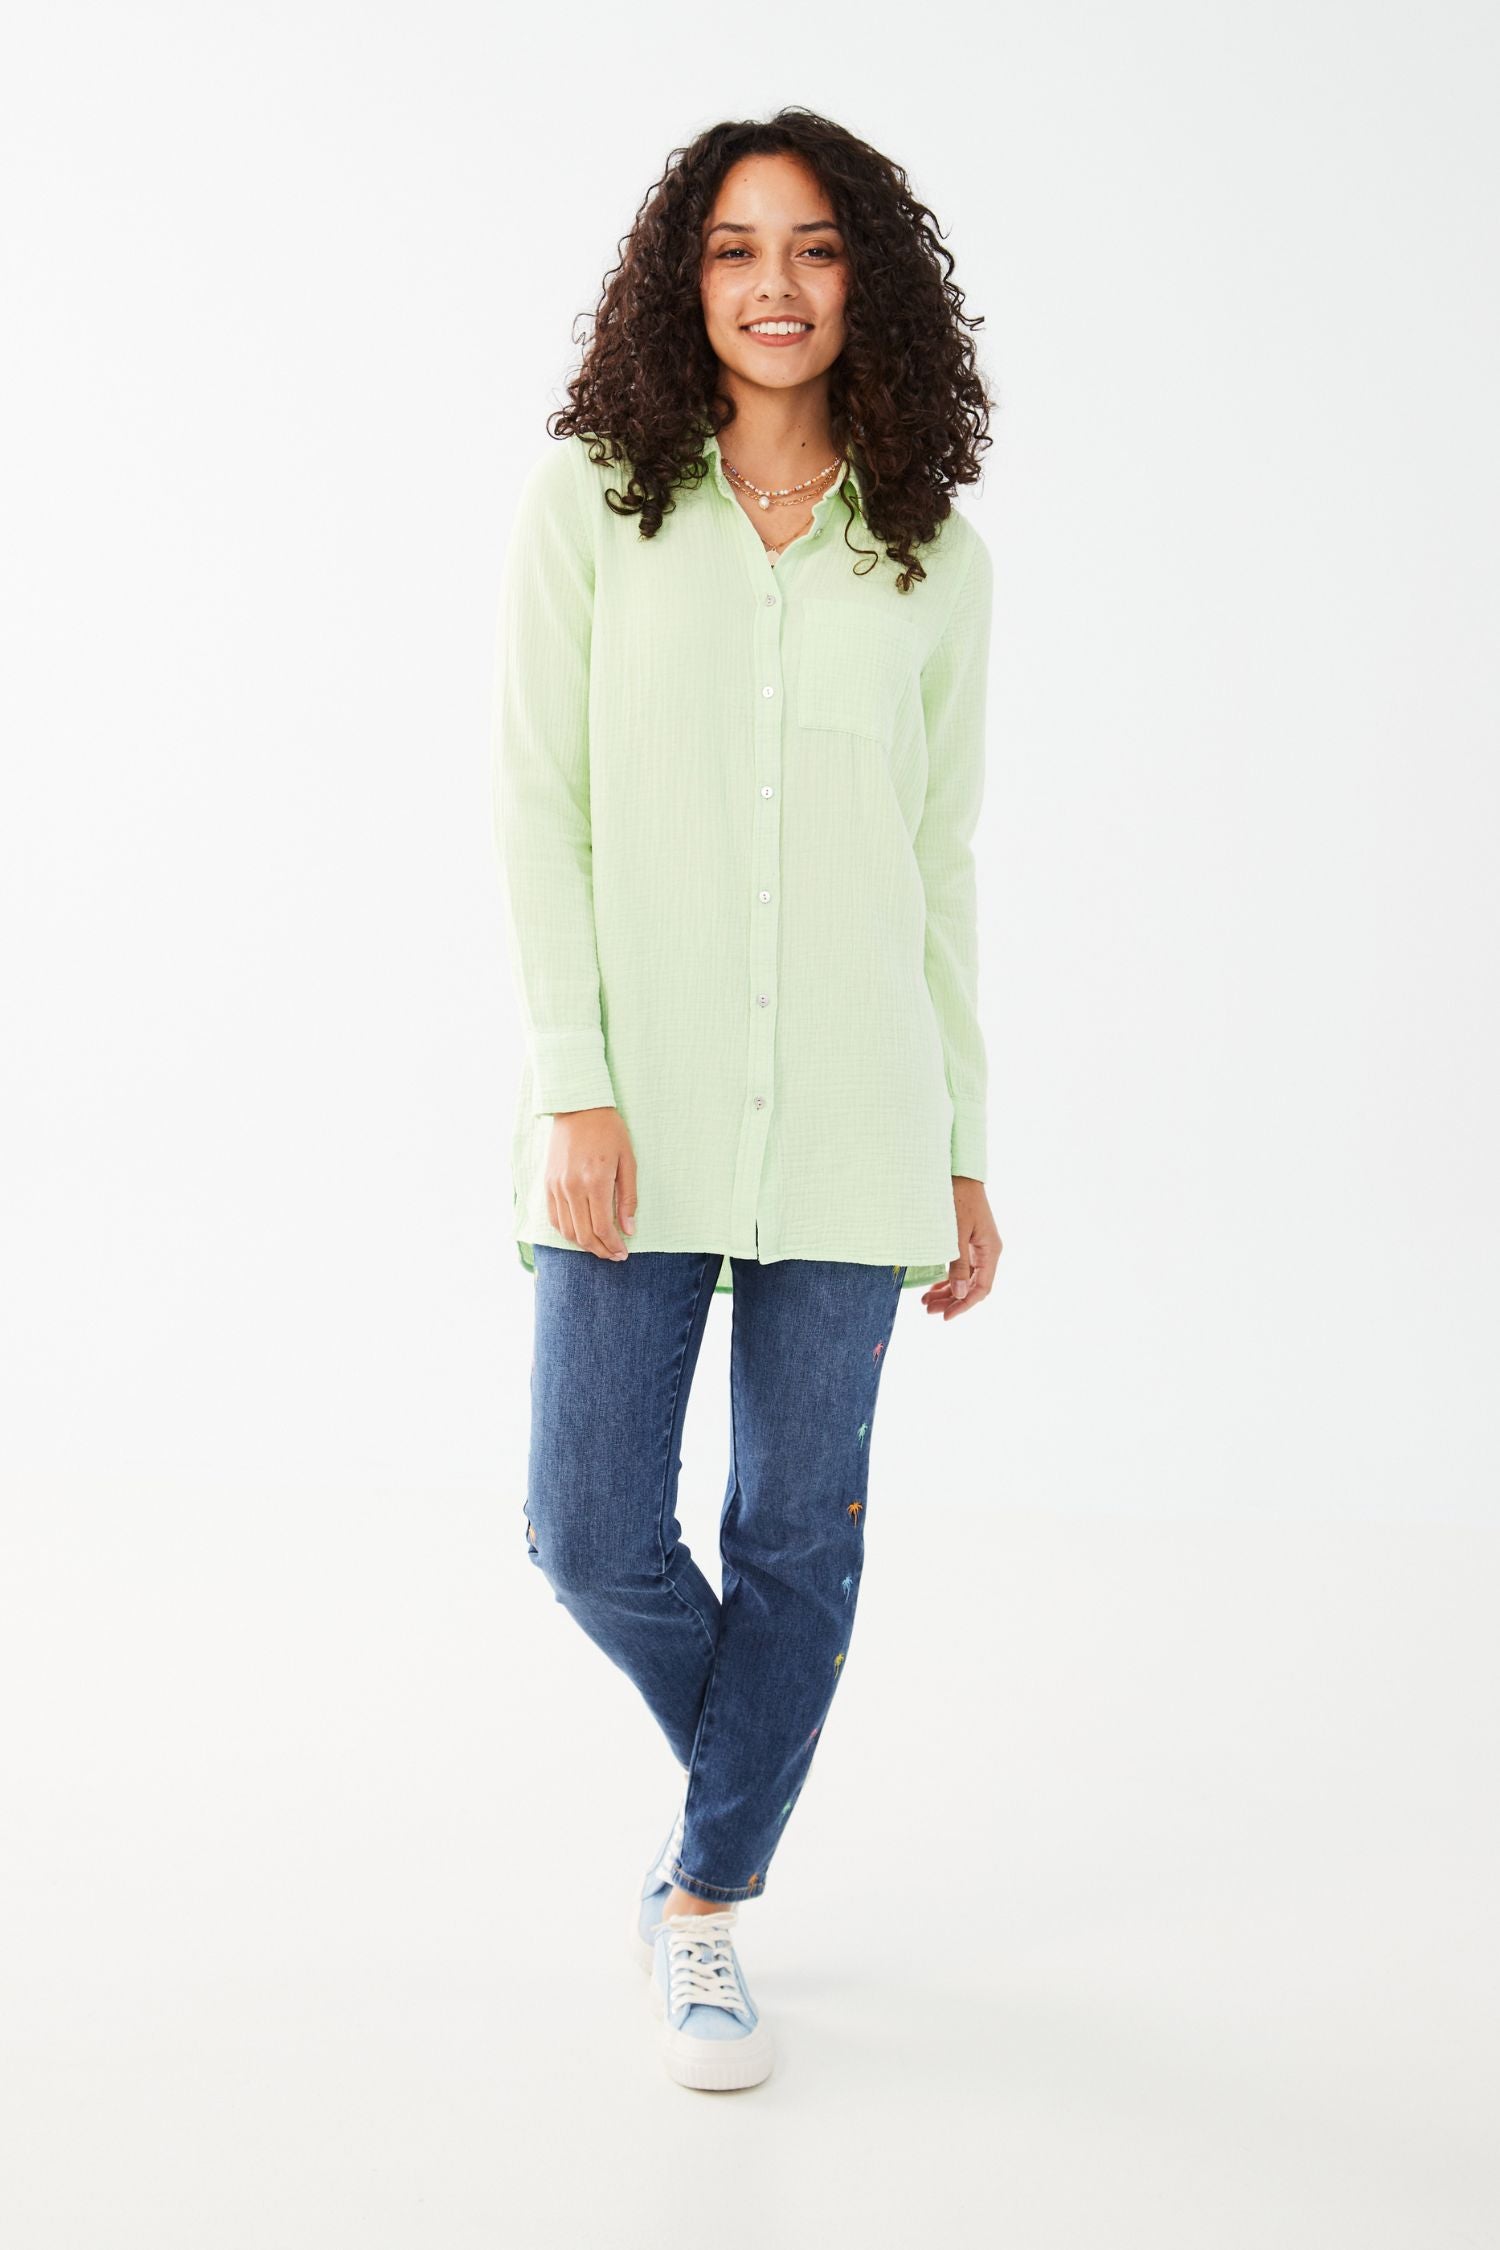 FDJ Long Sleeve Crinkle Cotton Tunic - Style 7122975F, front2, green